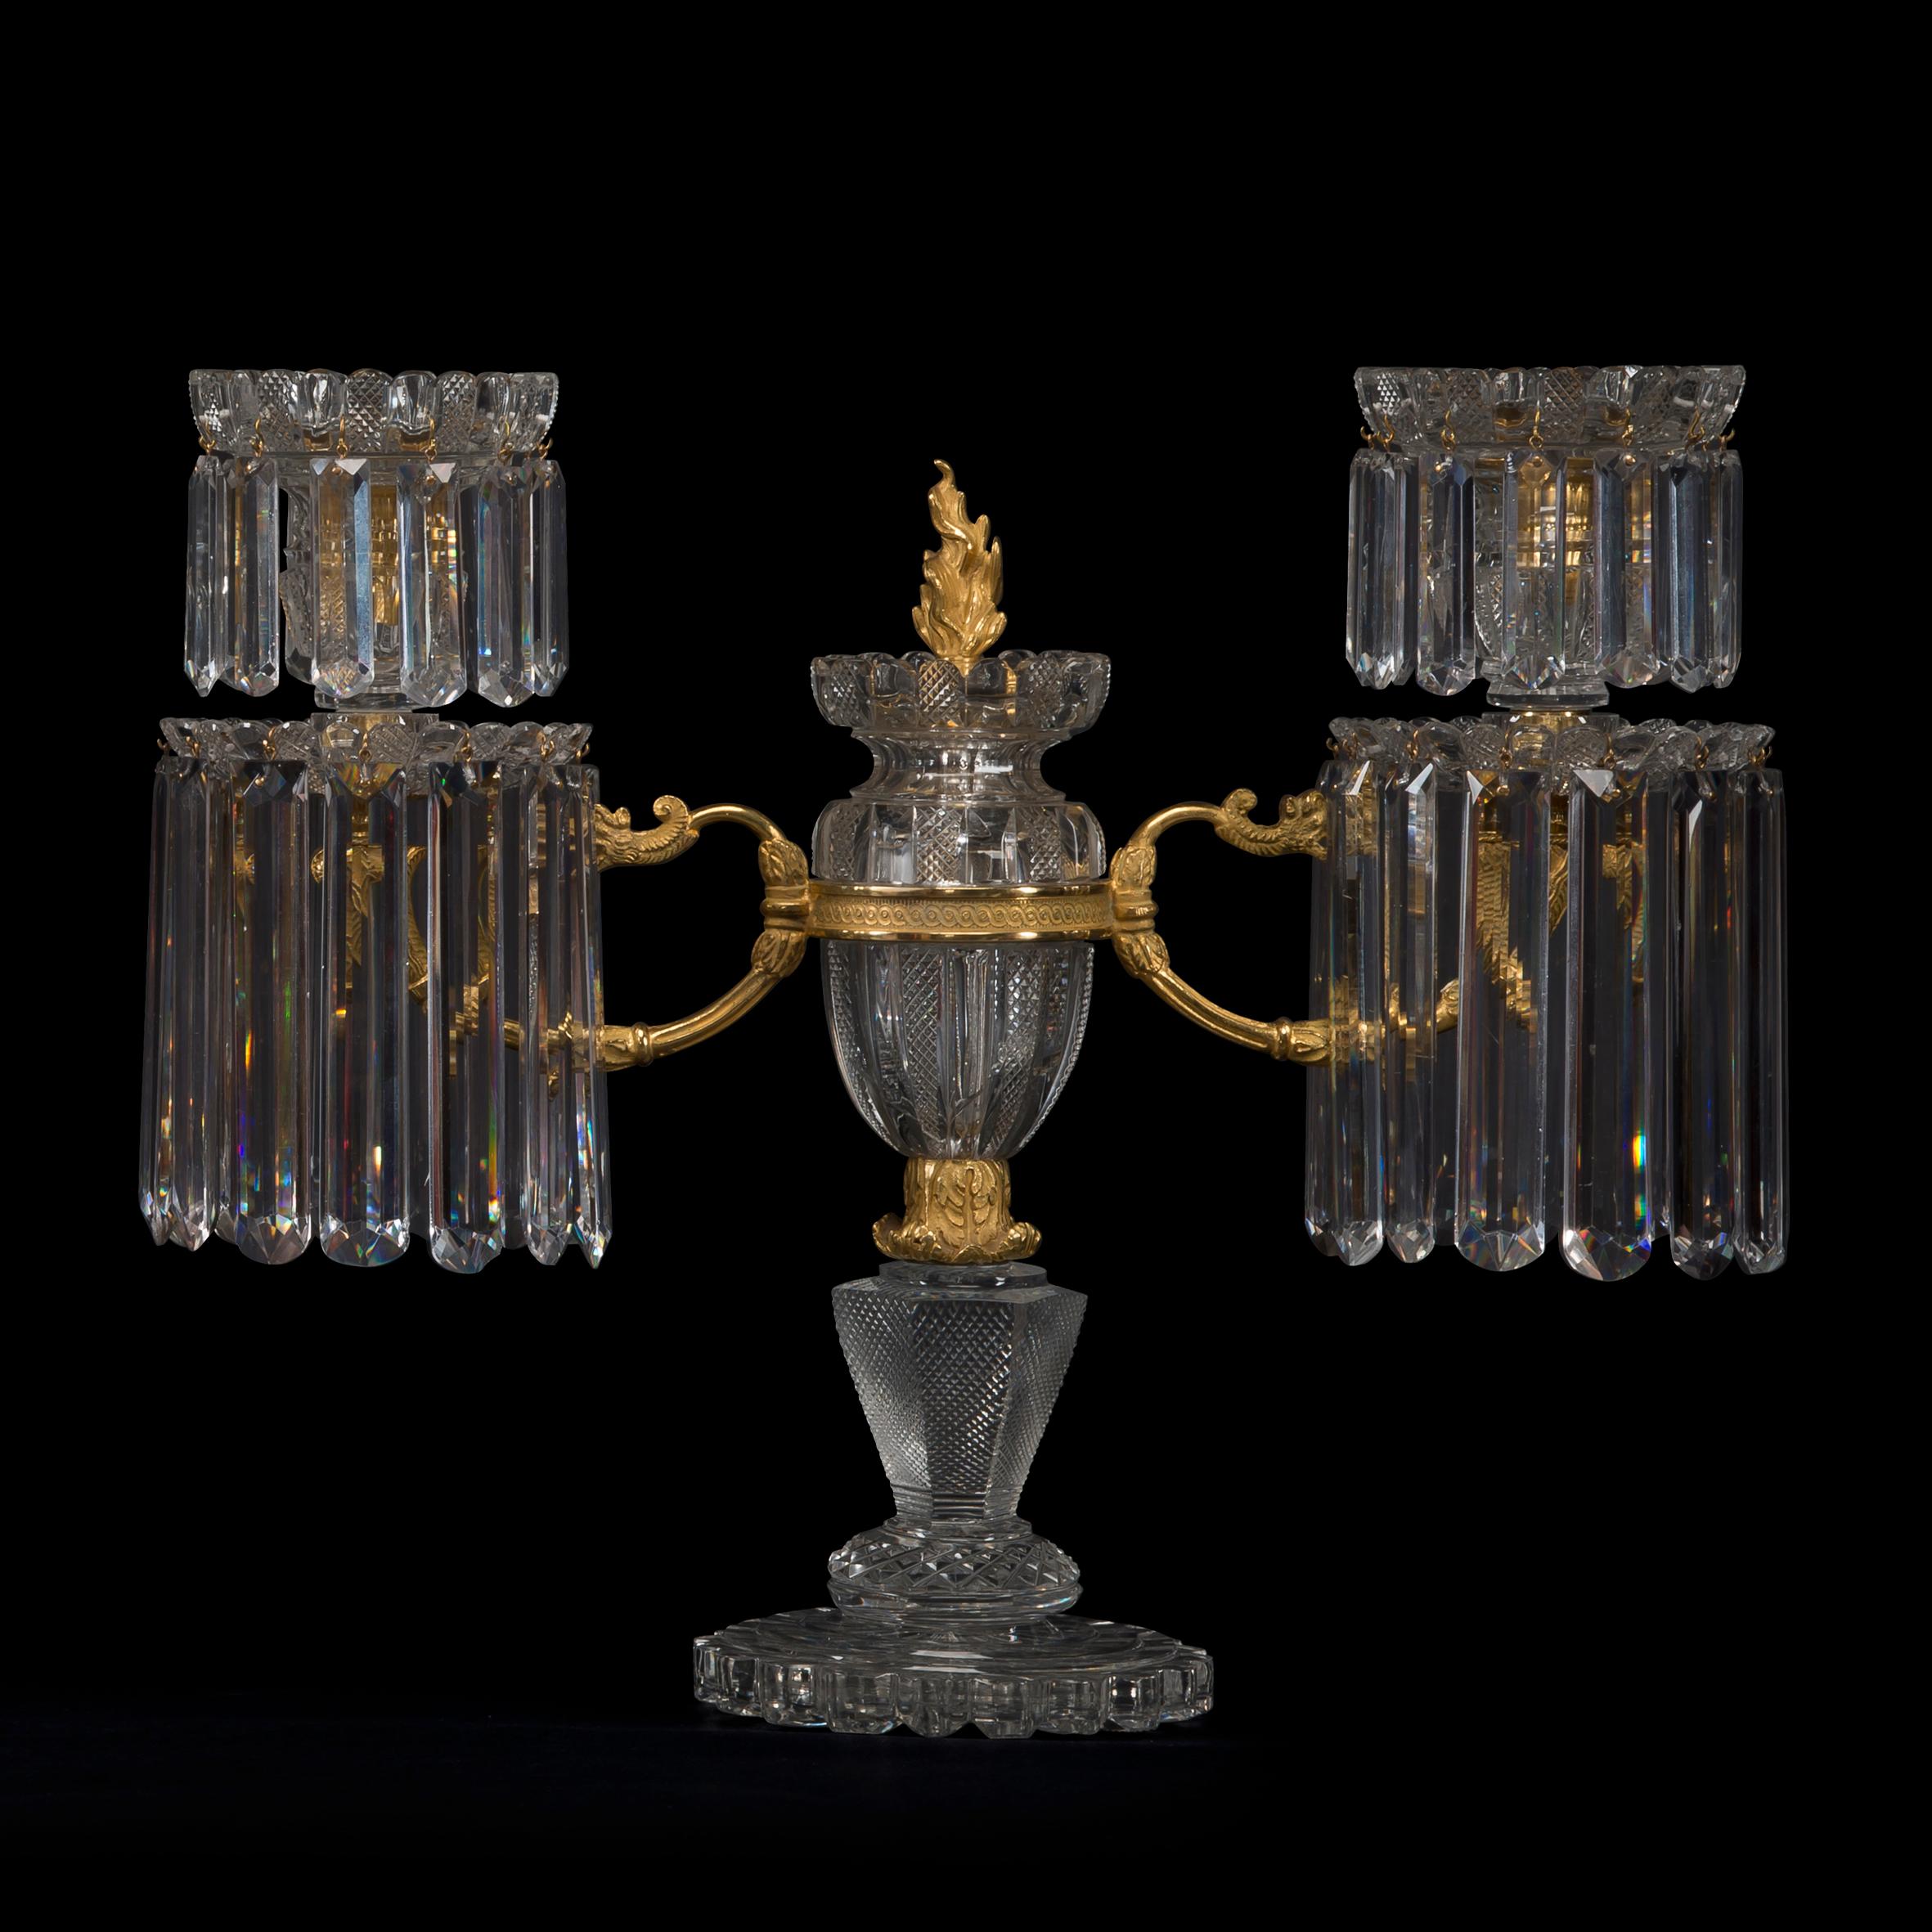 A rare pair of Regency twin-light gilt bronze mounted, pillar and file cut, glass candelabra by John Blades.

The firm of John Blades was first recorded in the London guide for 1783 at 5 Ludgate Hill, remaining at this address until 1829. The firm